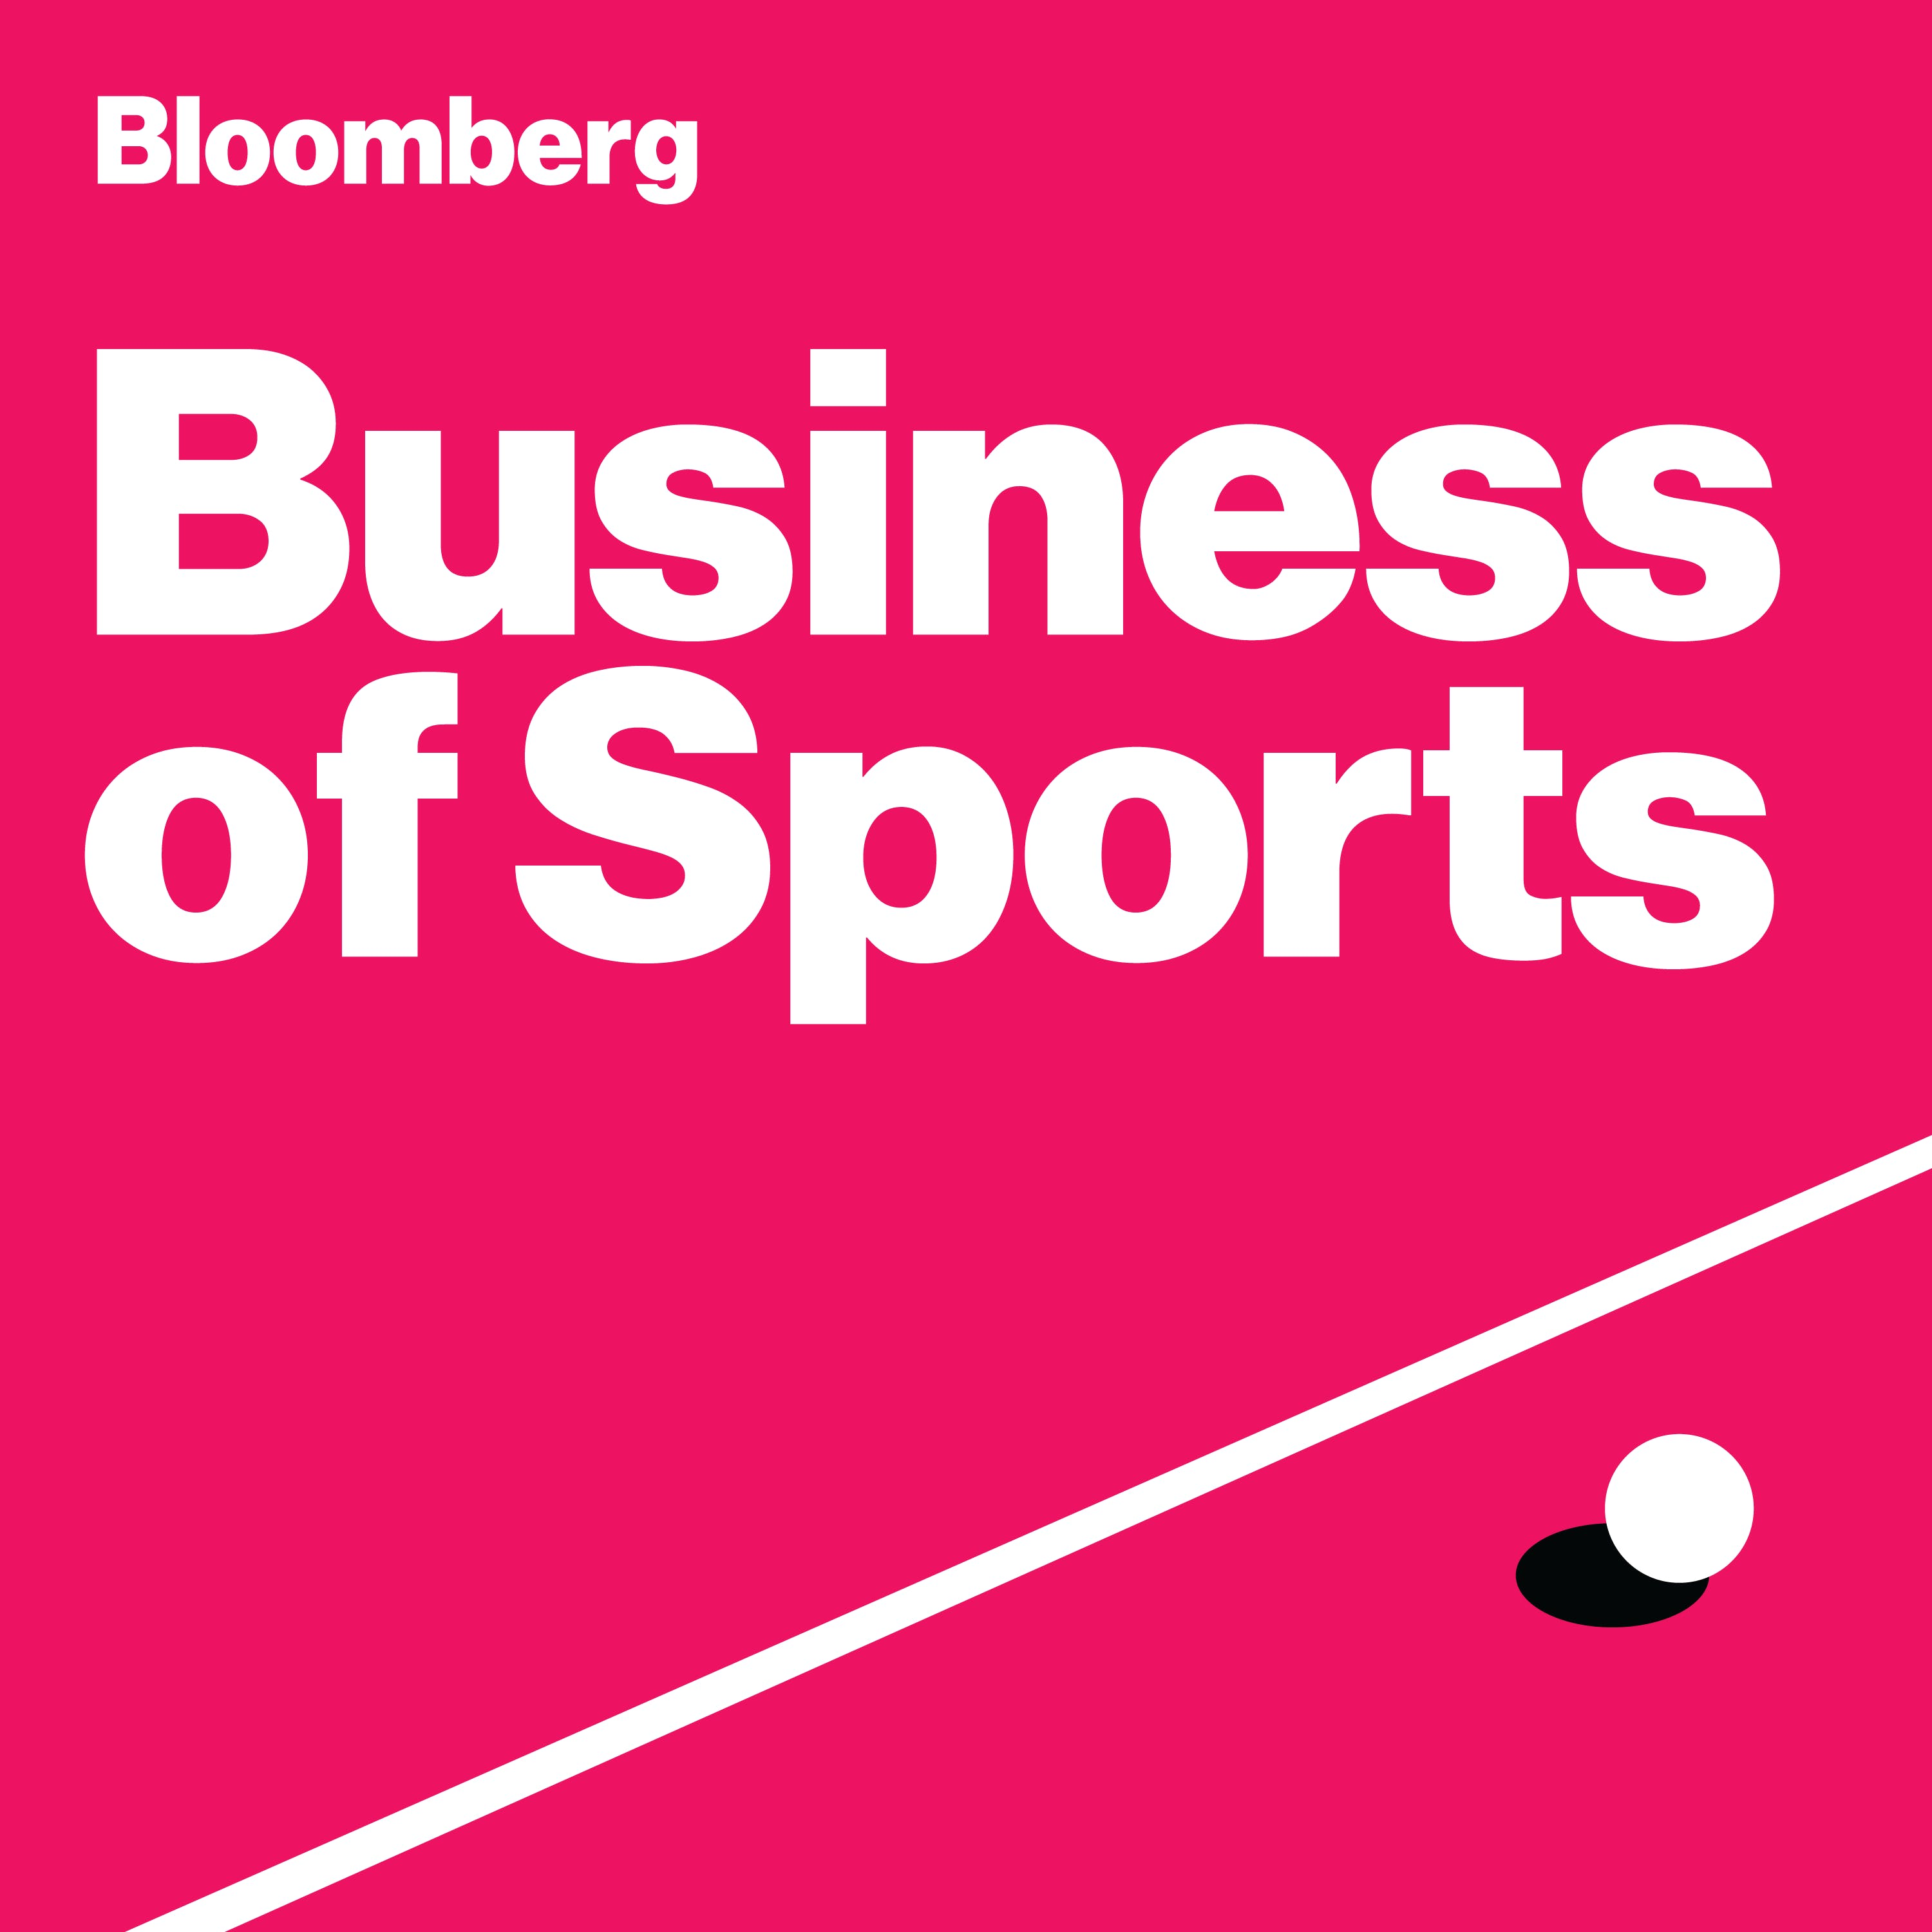 Jeter's Hire, Daytona 500, the Winter Games: Sports Business